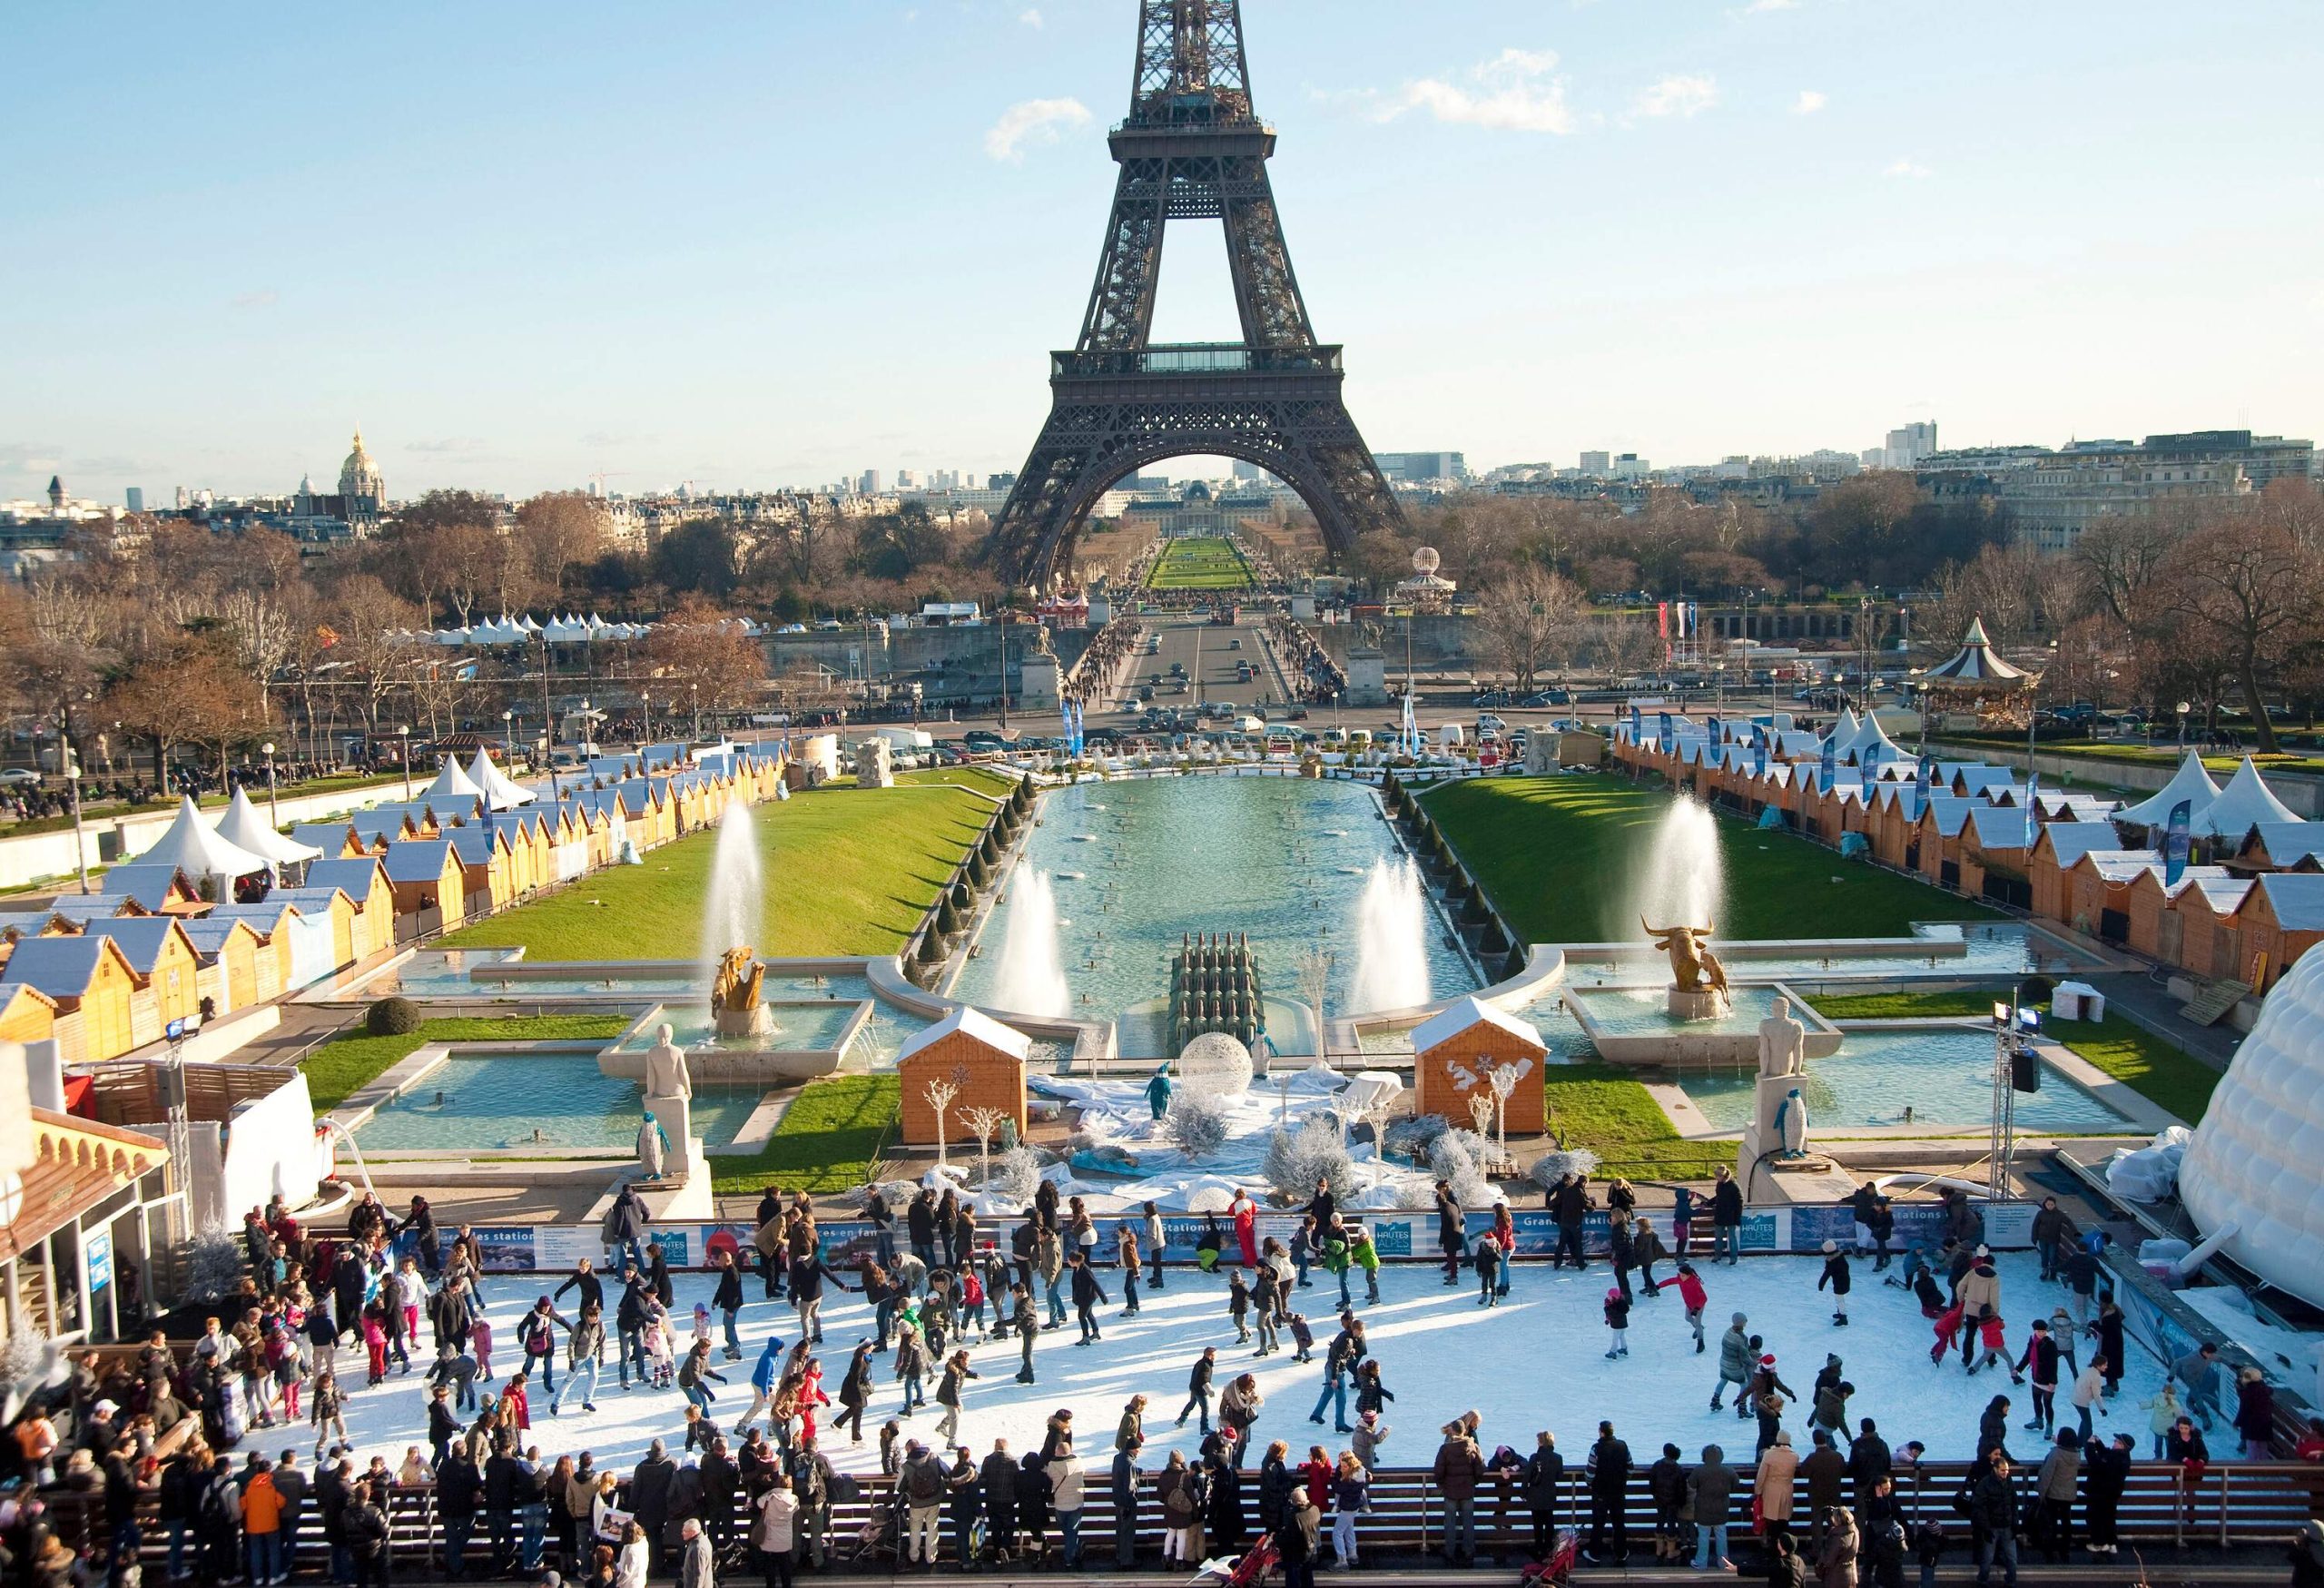 Ice skate rink during Christmas with Eiffel tower in background at Paris, France.